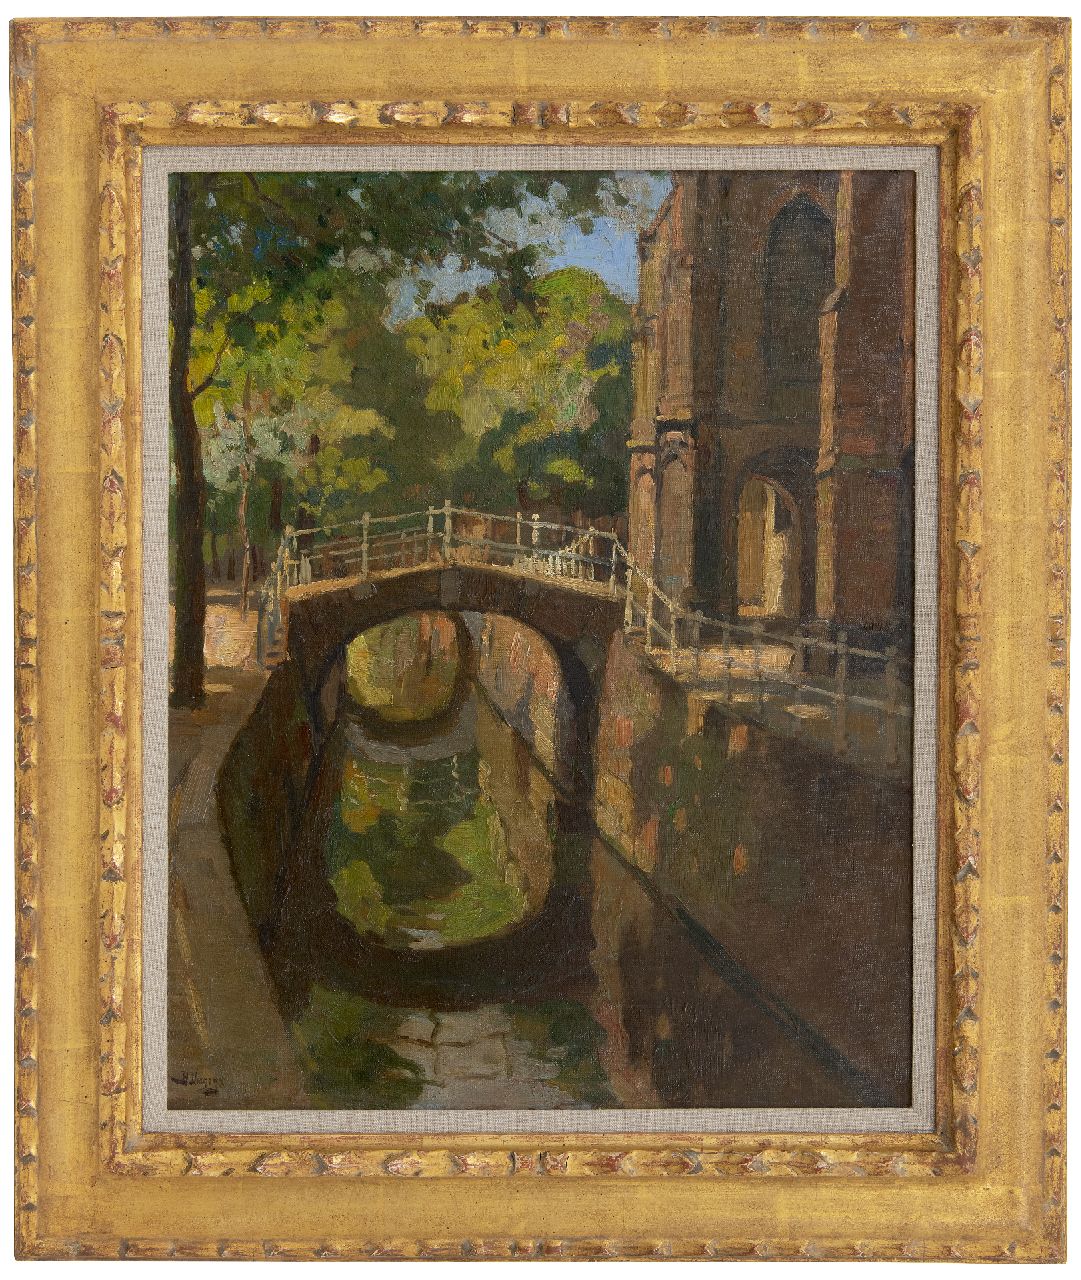 Viegers B.P.  | Bernardus Petrus 'Ben' Viegers, The Bartholomeusbrug in Delft in summer, oil on canvas 50.2 x 40.3 cm, signed l.l.